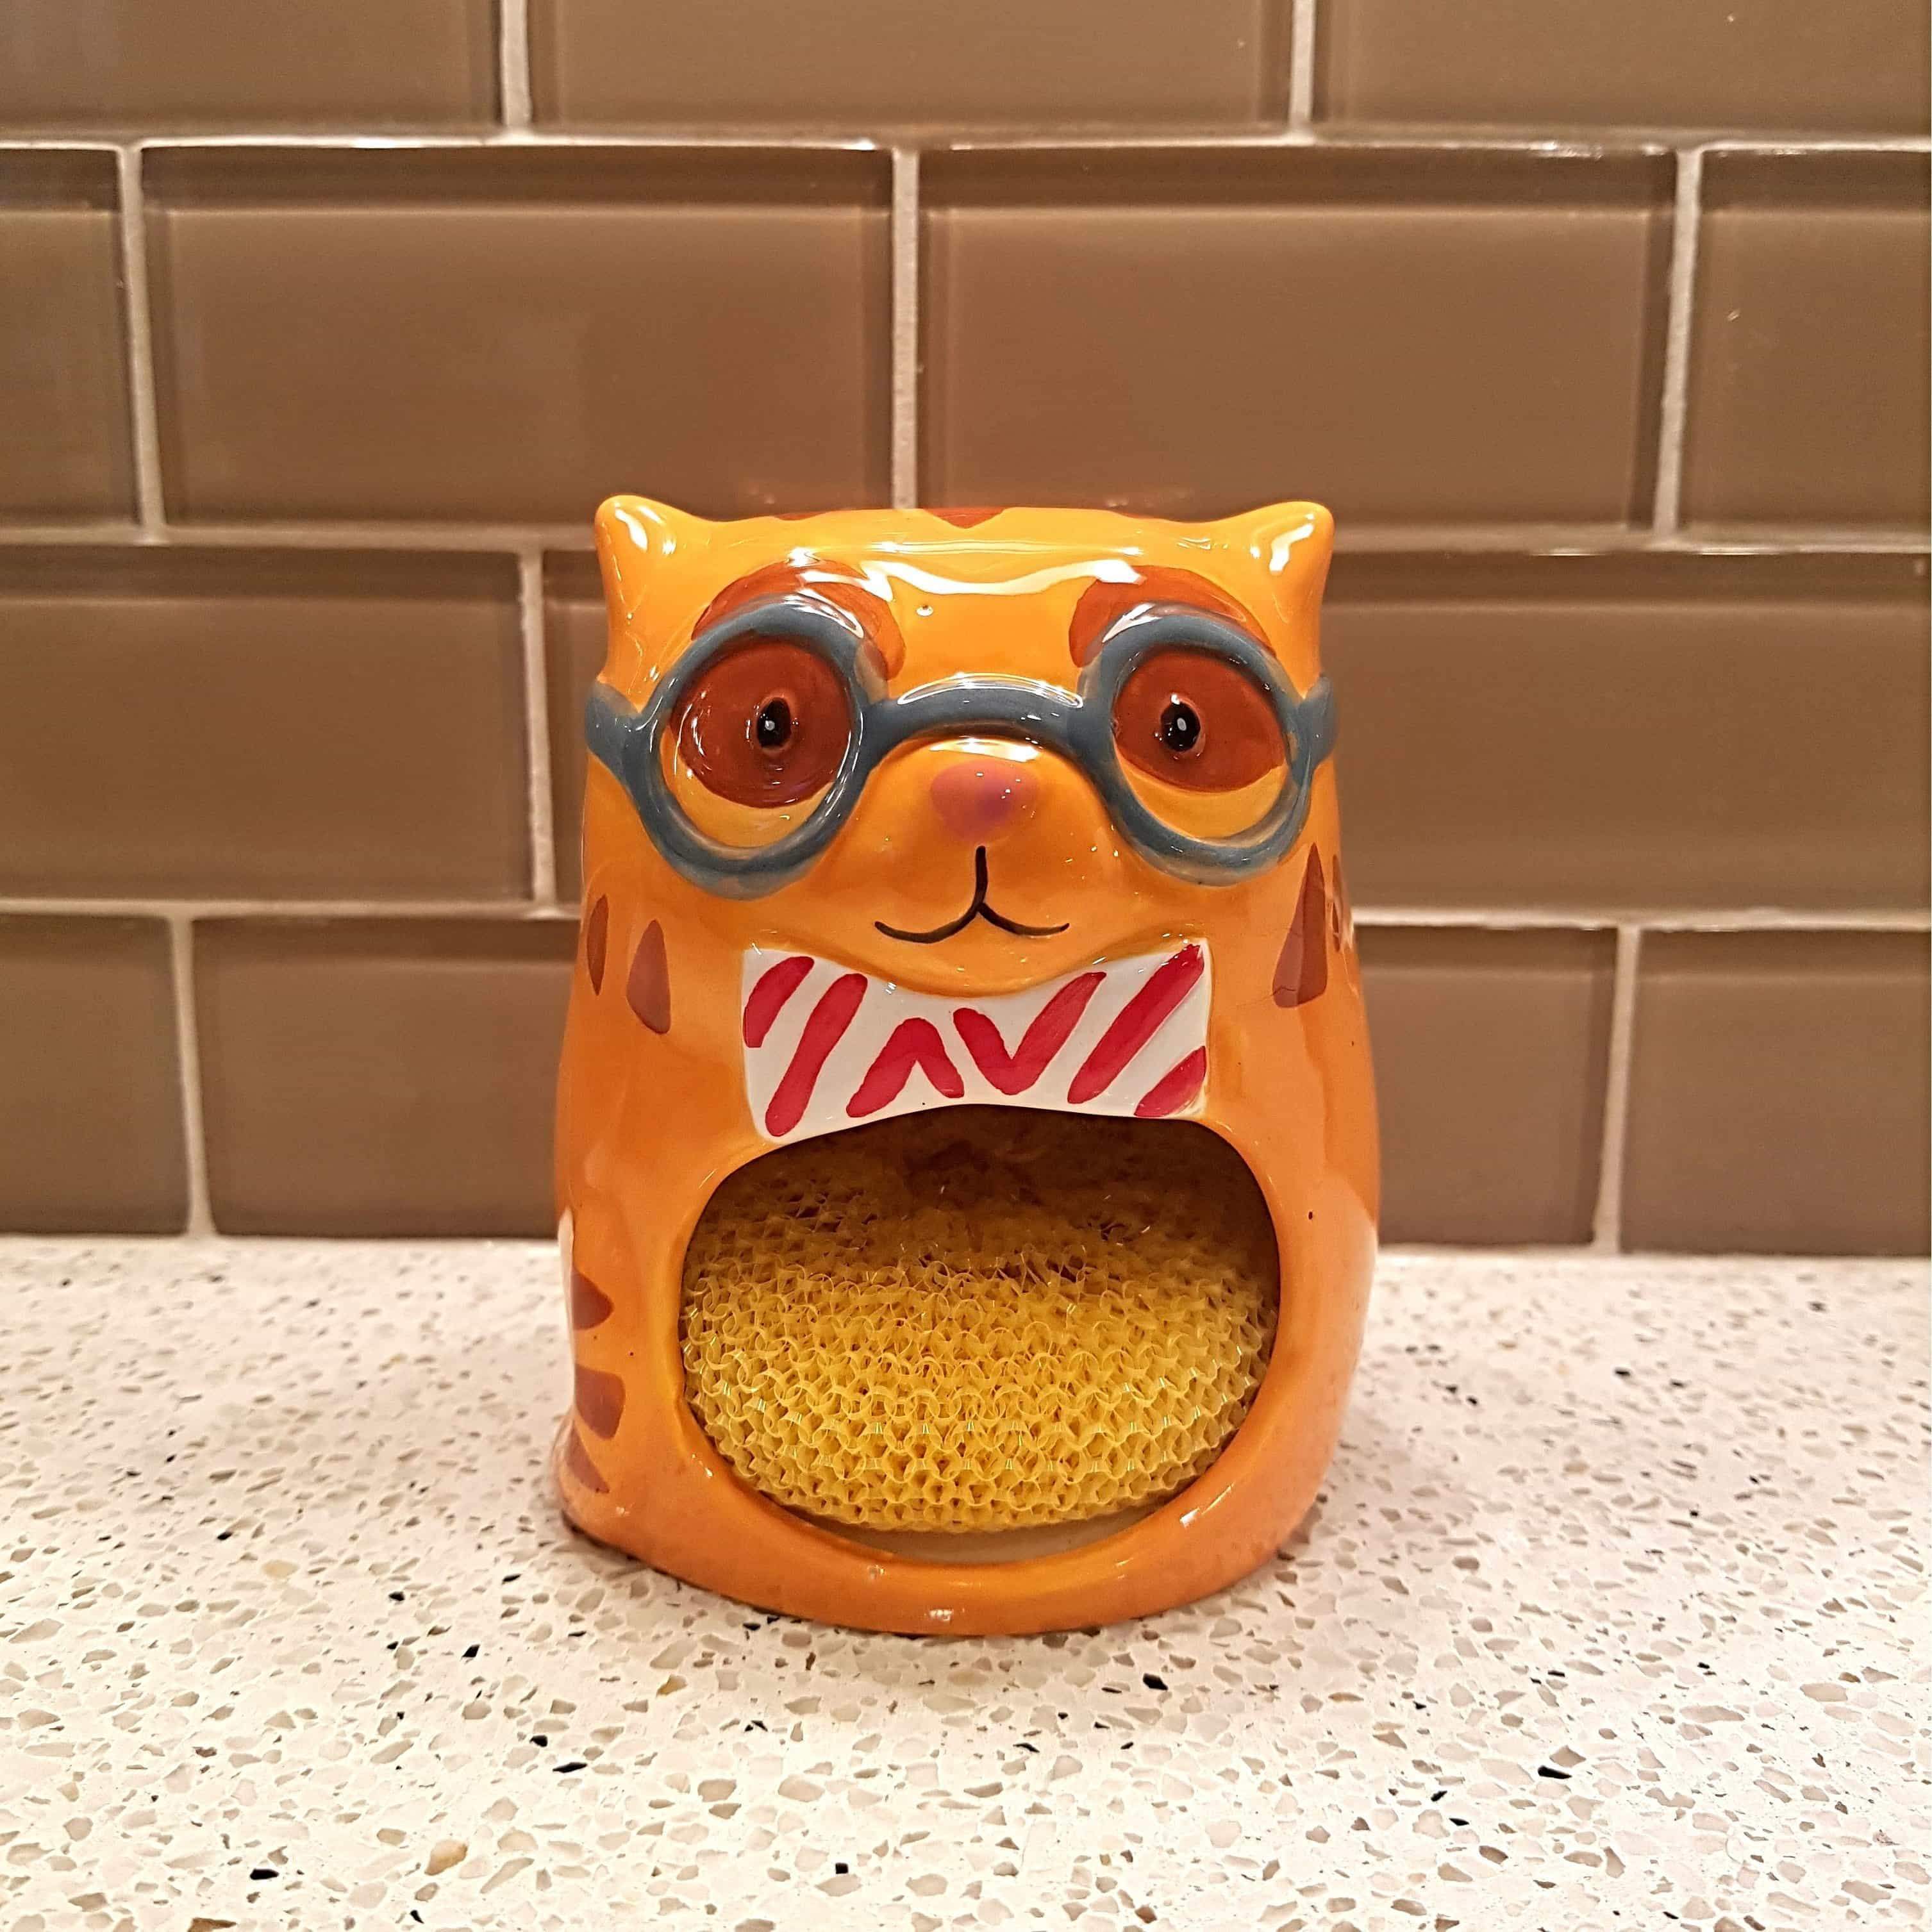 Cat Themed Kitchen Accessories, Cat Sponge Holder In the Shape of a Golden Tabby Cat